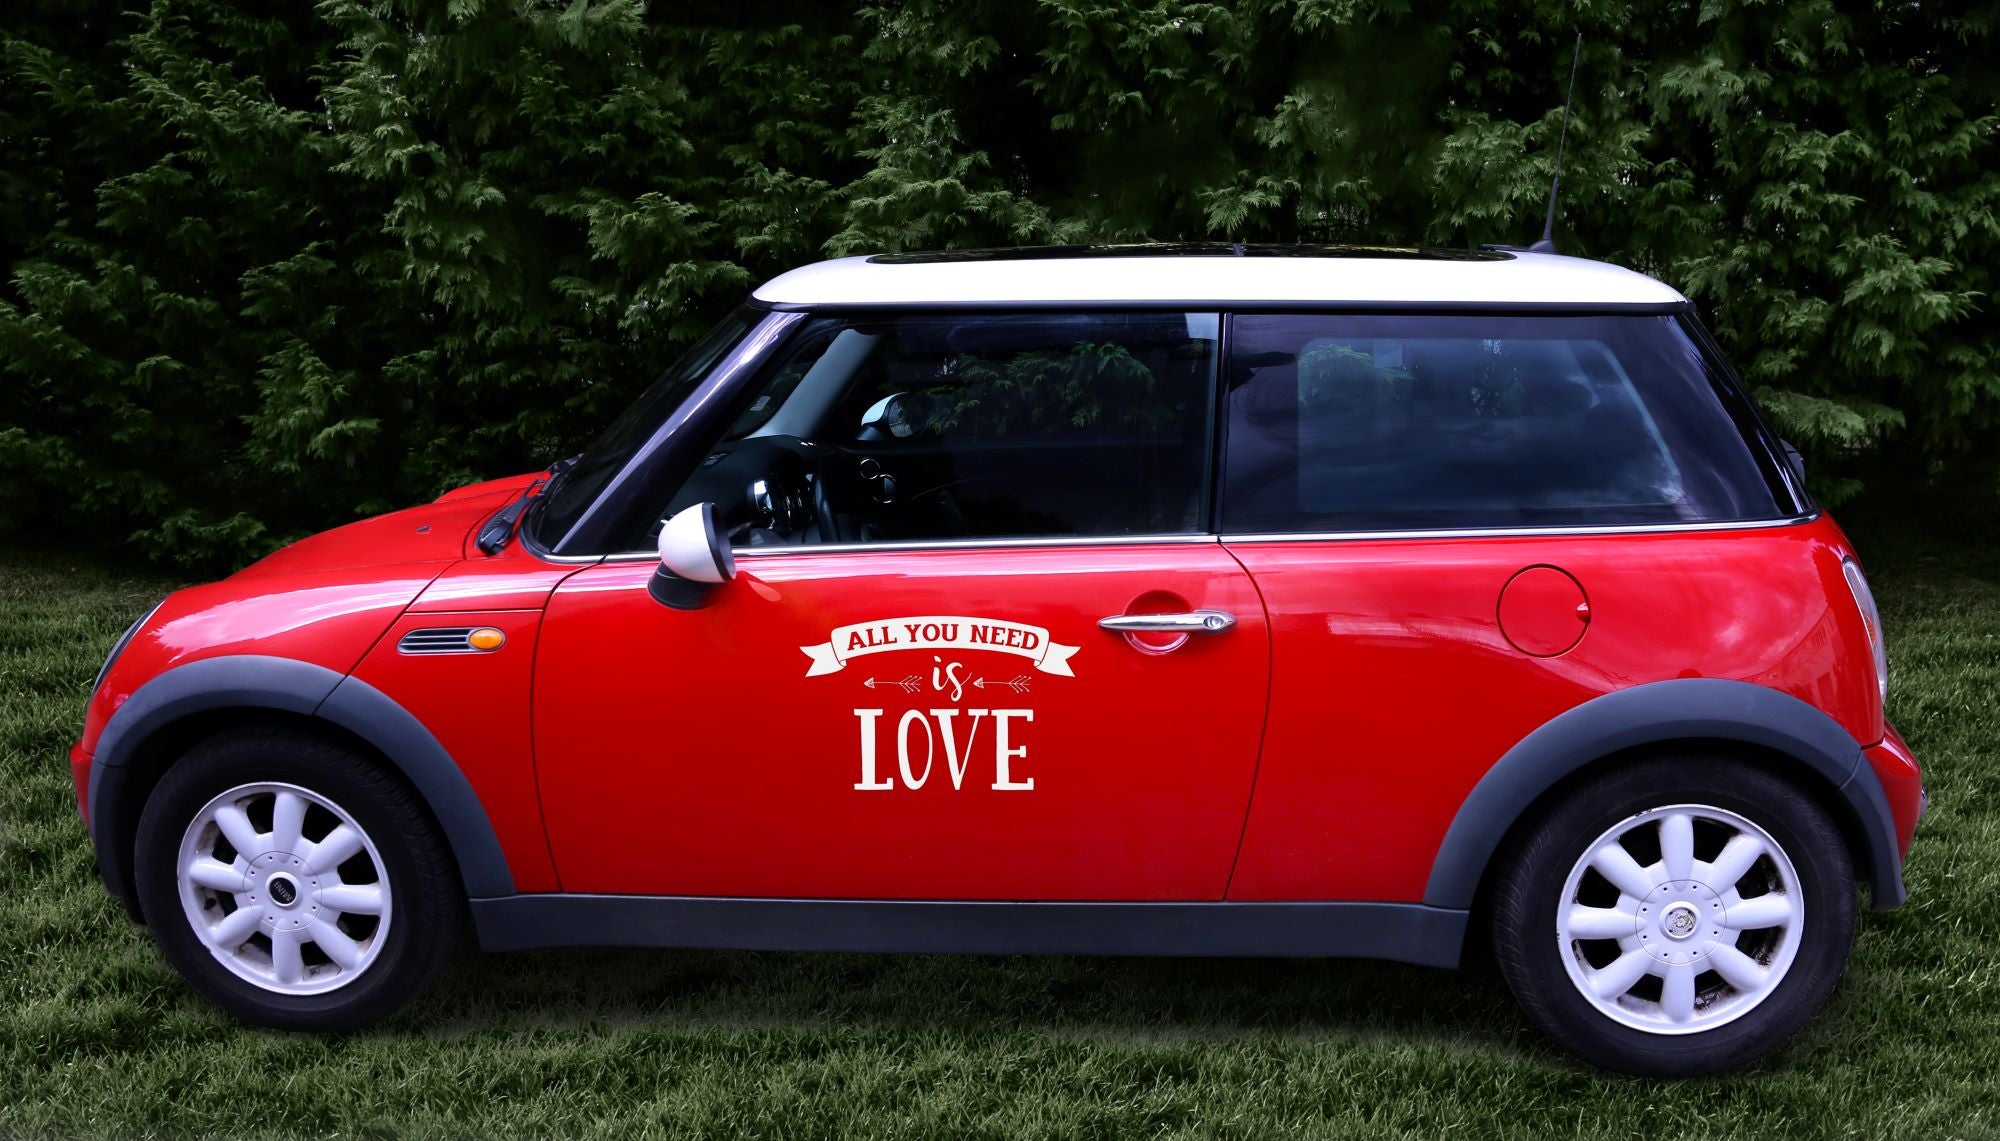 All you need is Love Wedding Car Sticker 